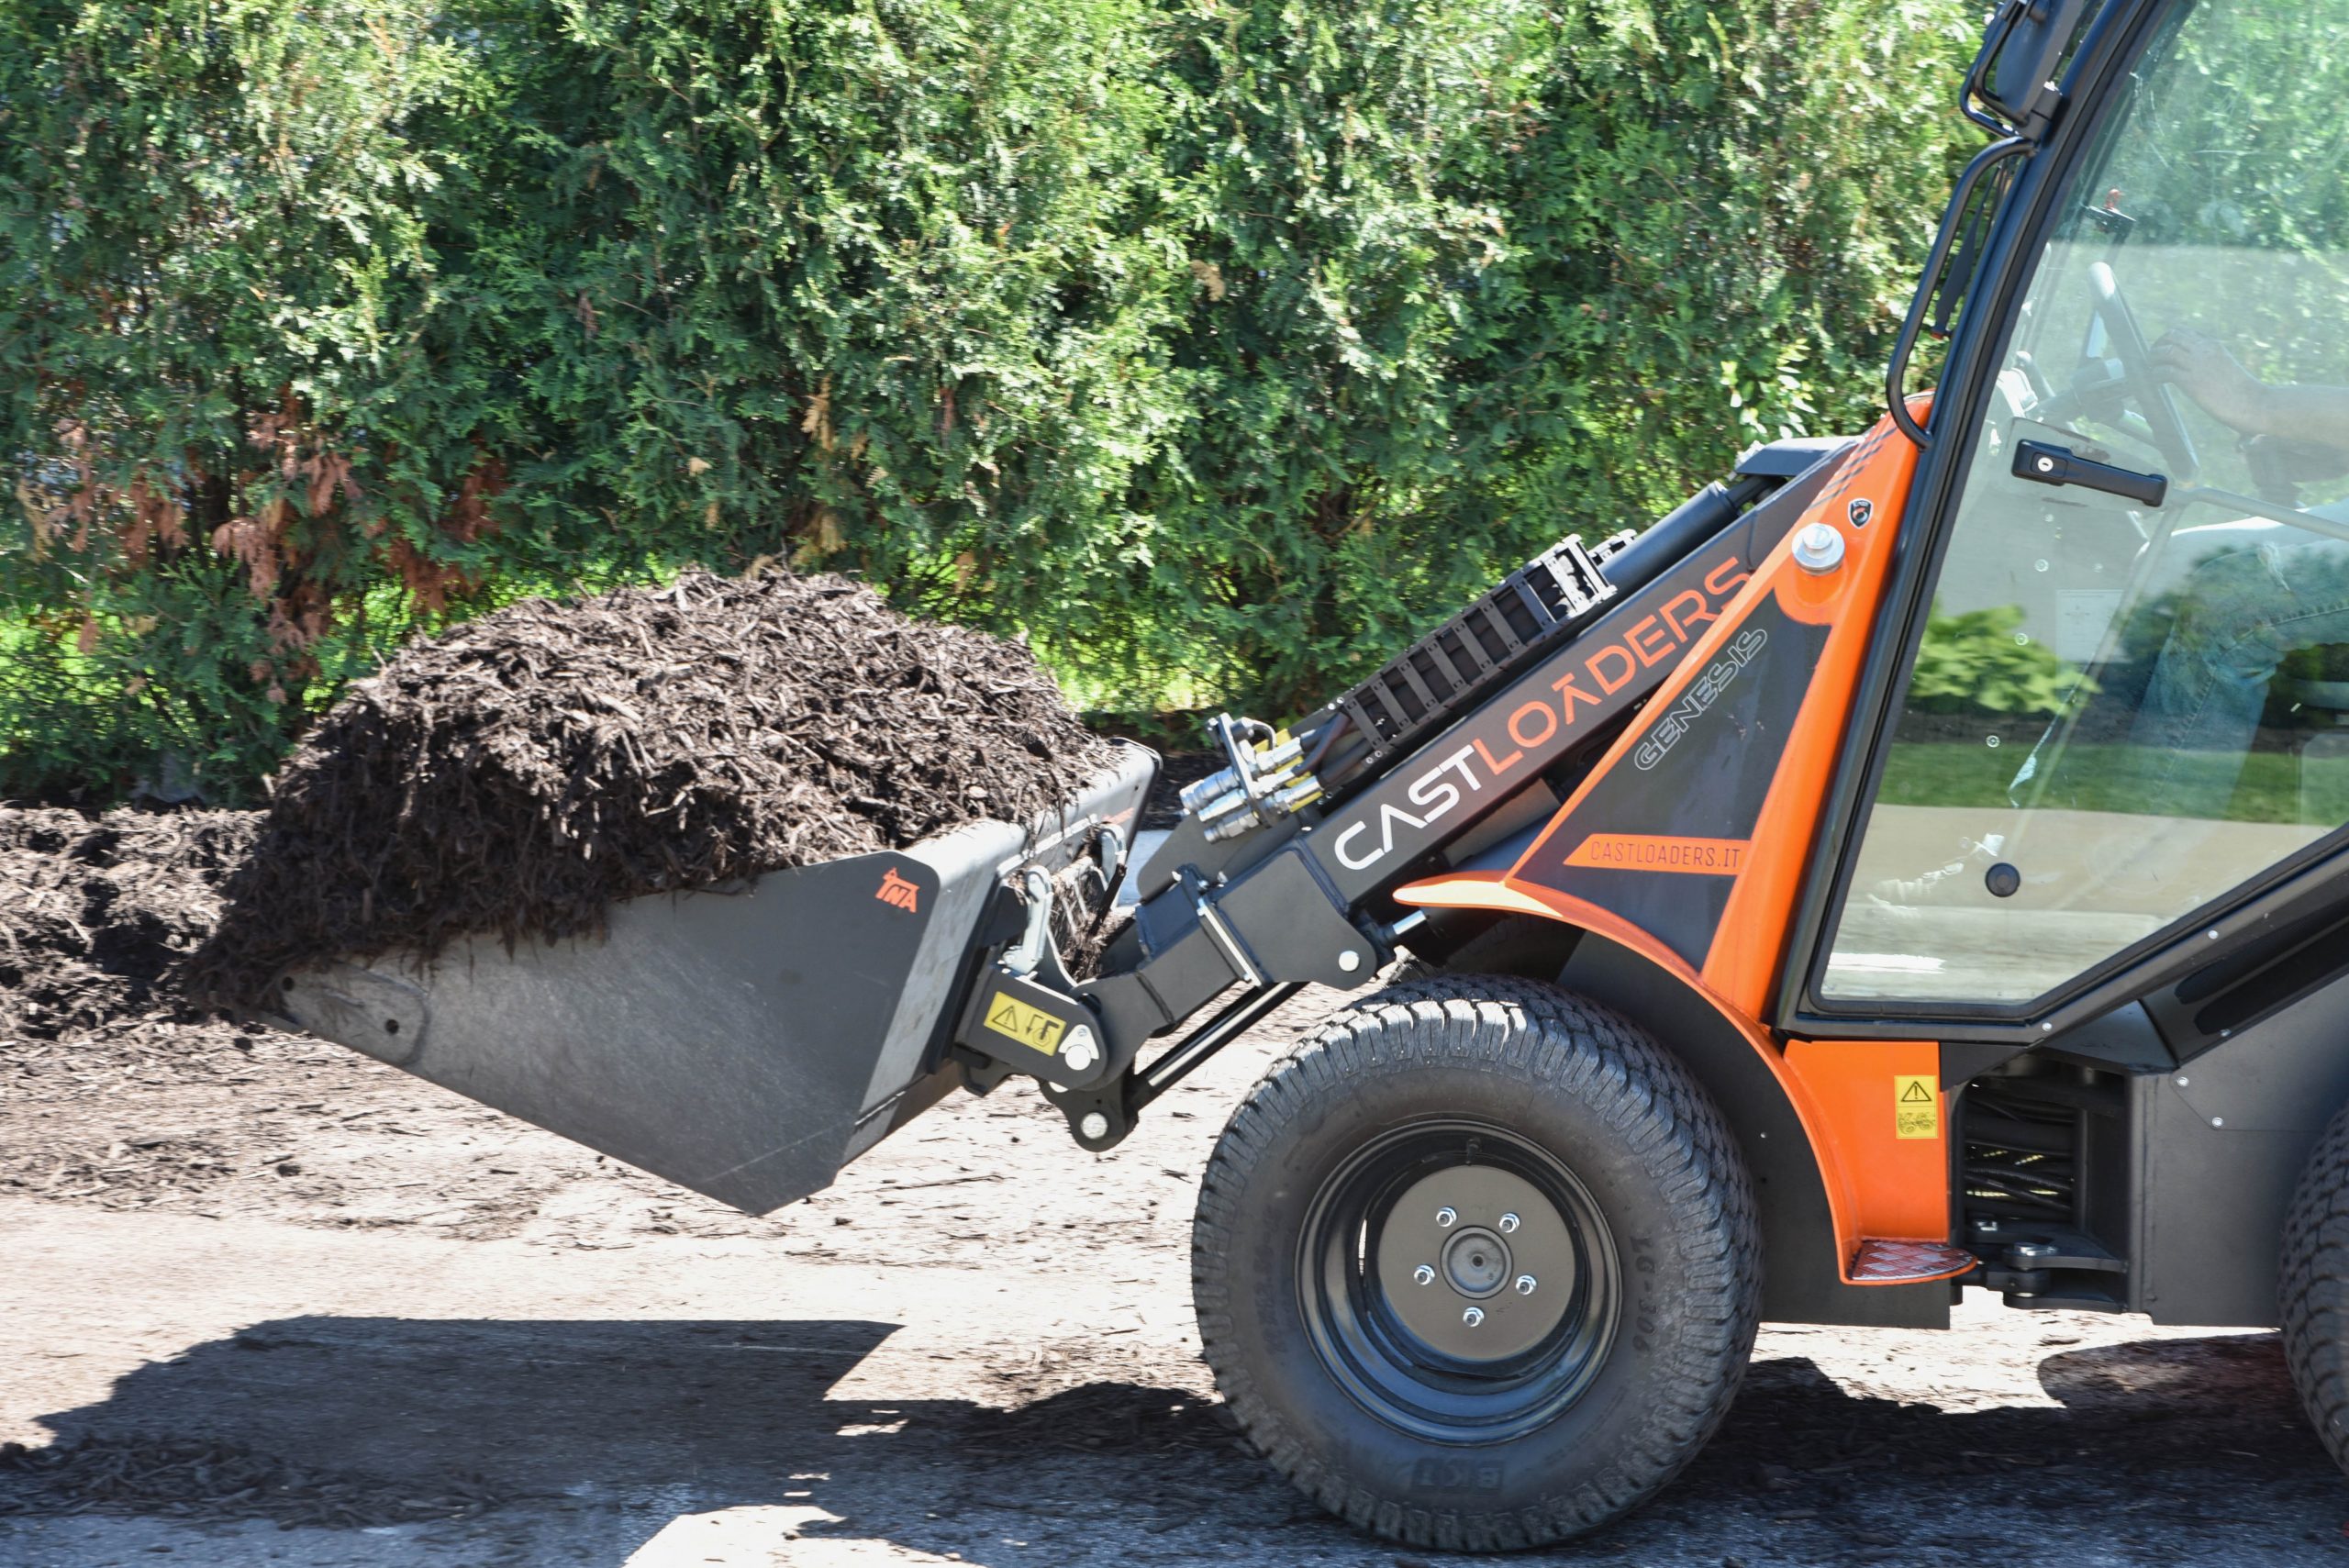 Cast Loaders are great with mulch jobs